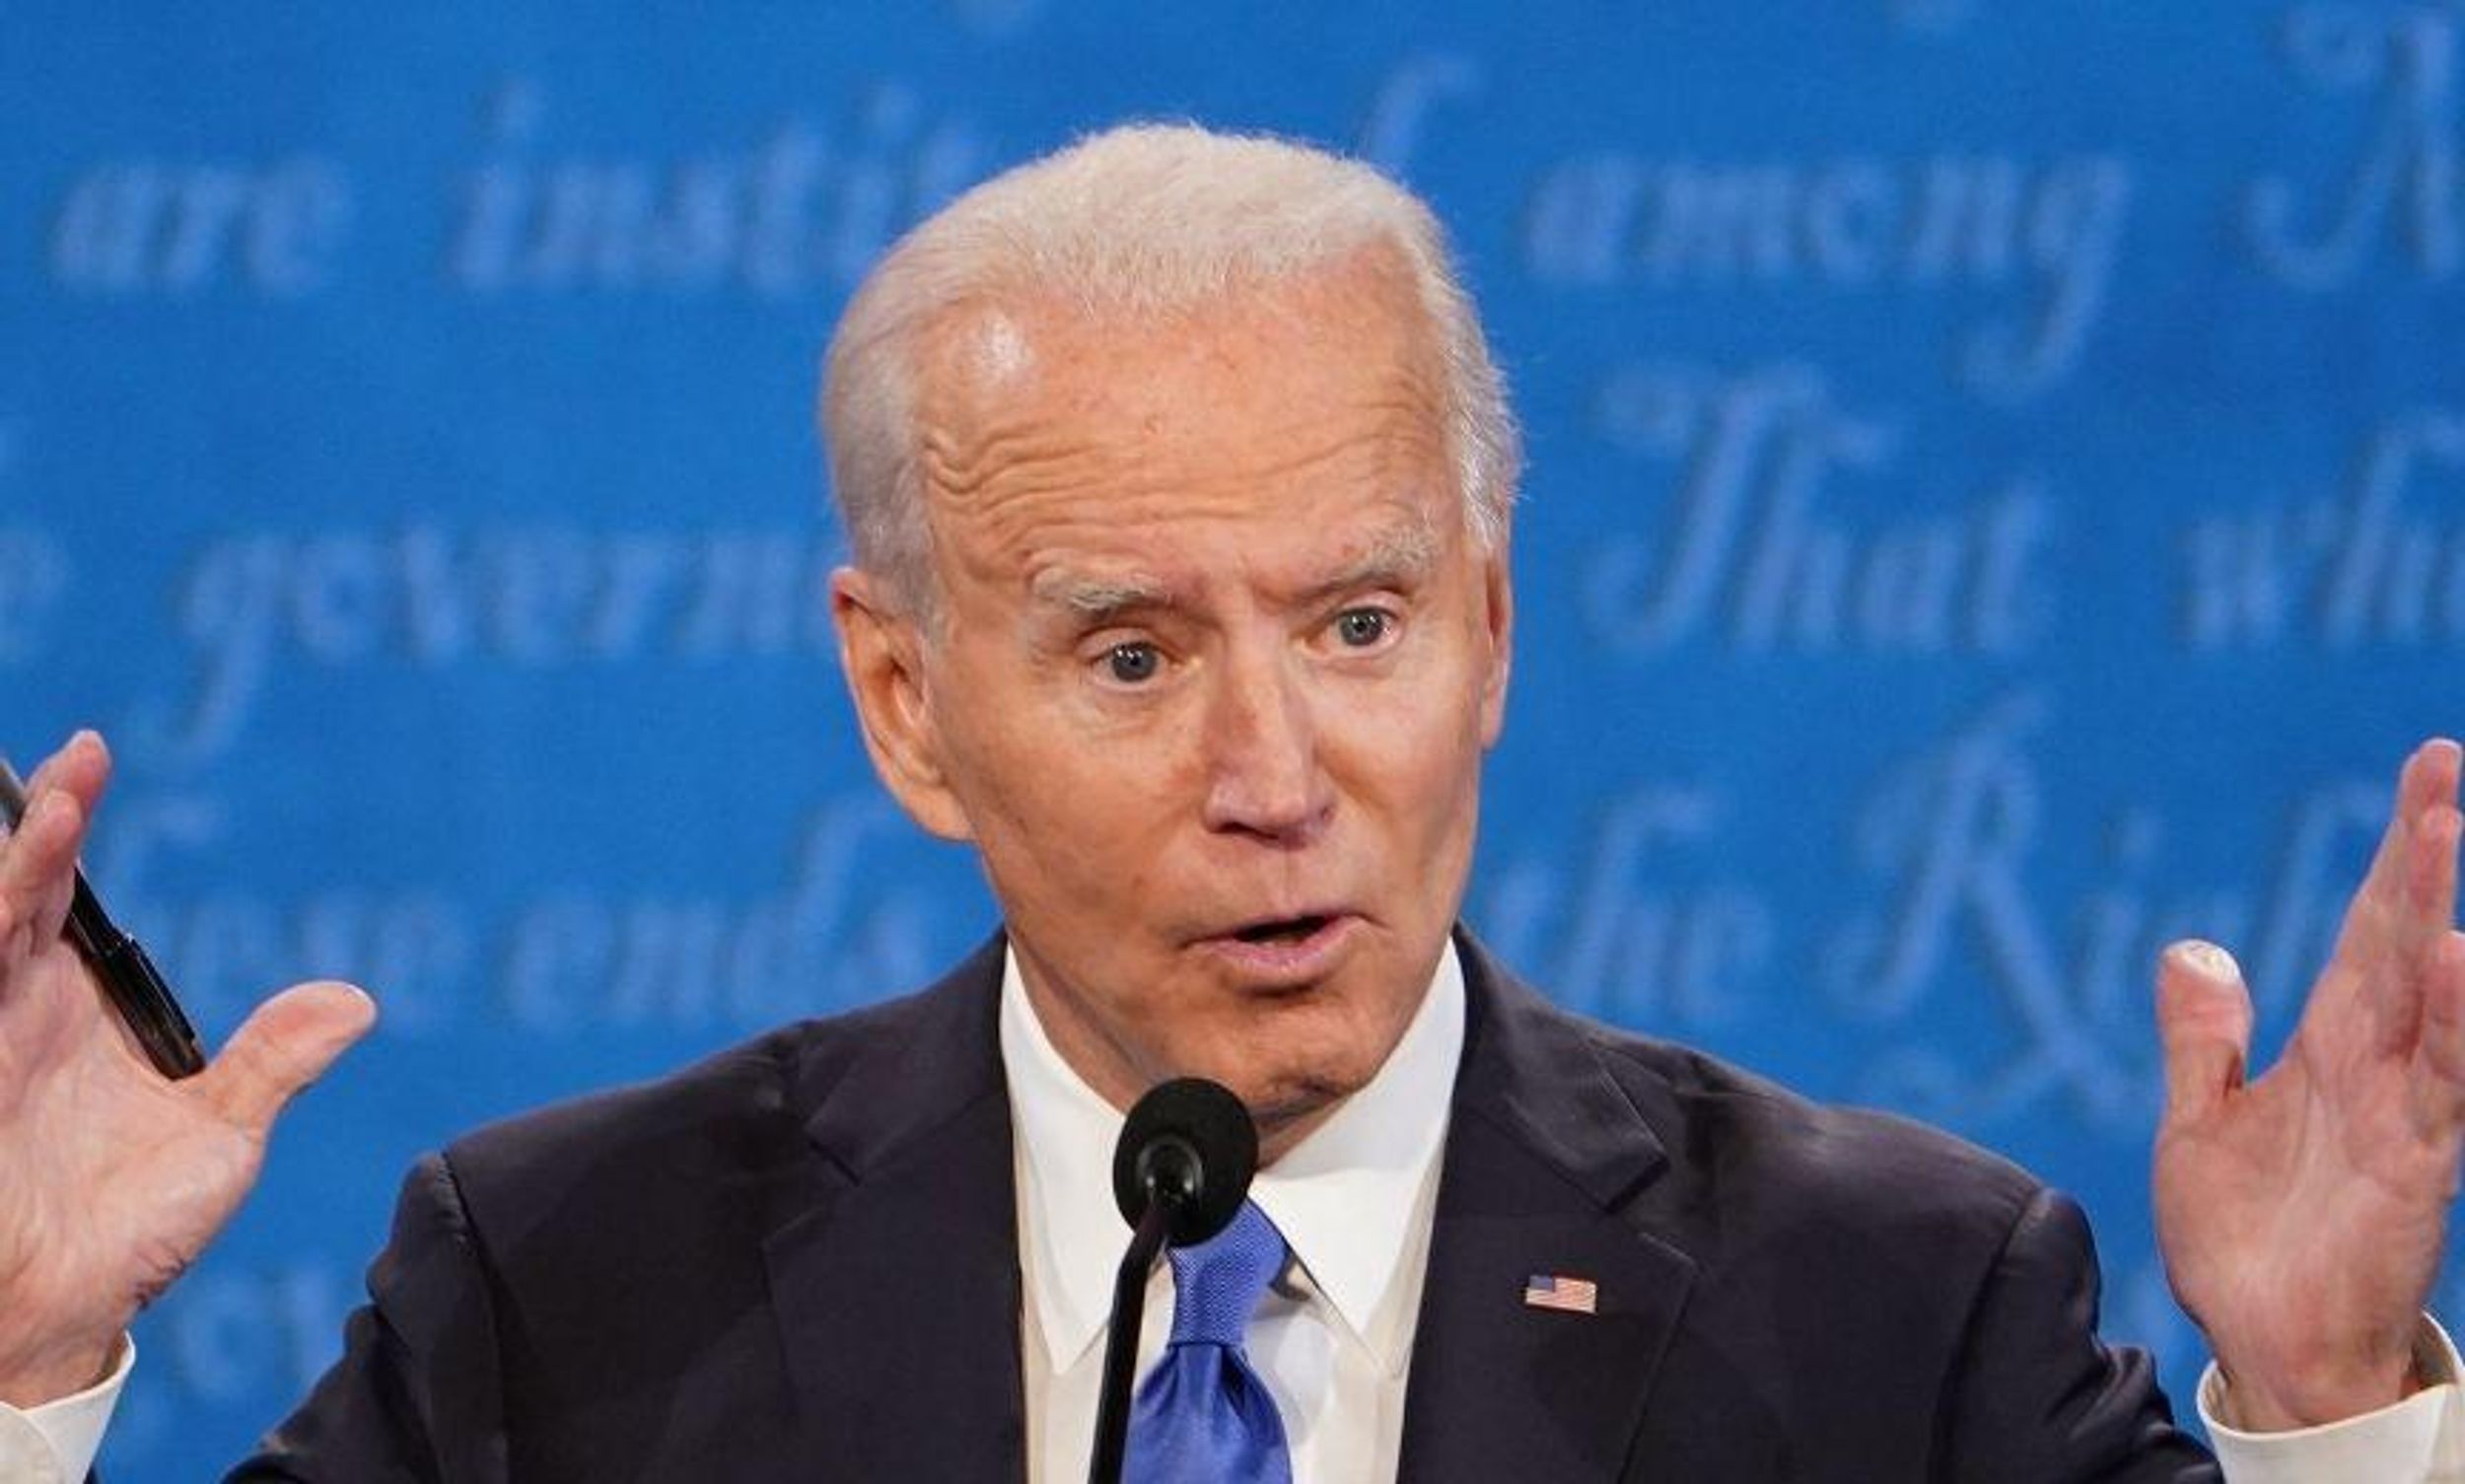 PolitiFact Forced to Fact Check Bonkers Video Claiming a Snake Jumped Out of Biden's Sleeve During Debate